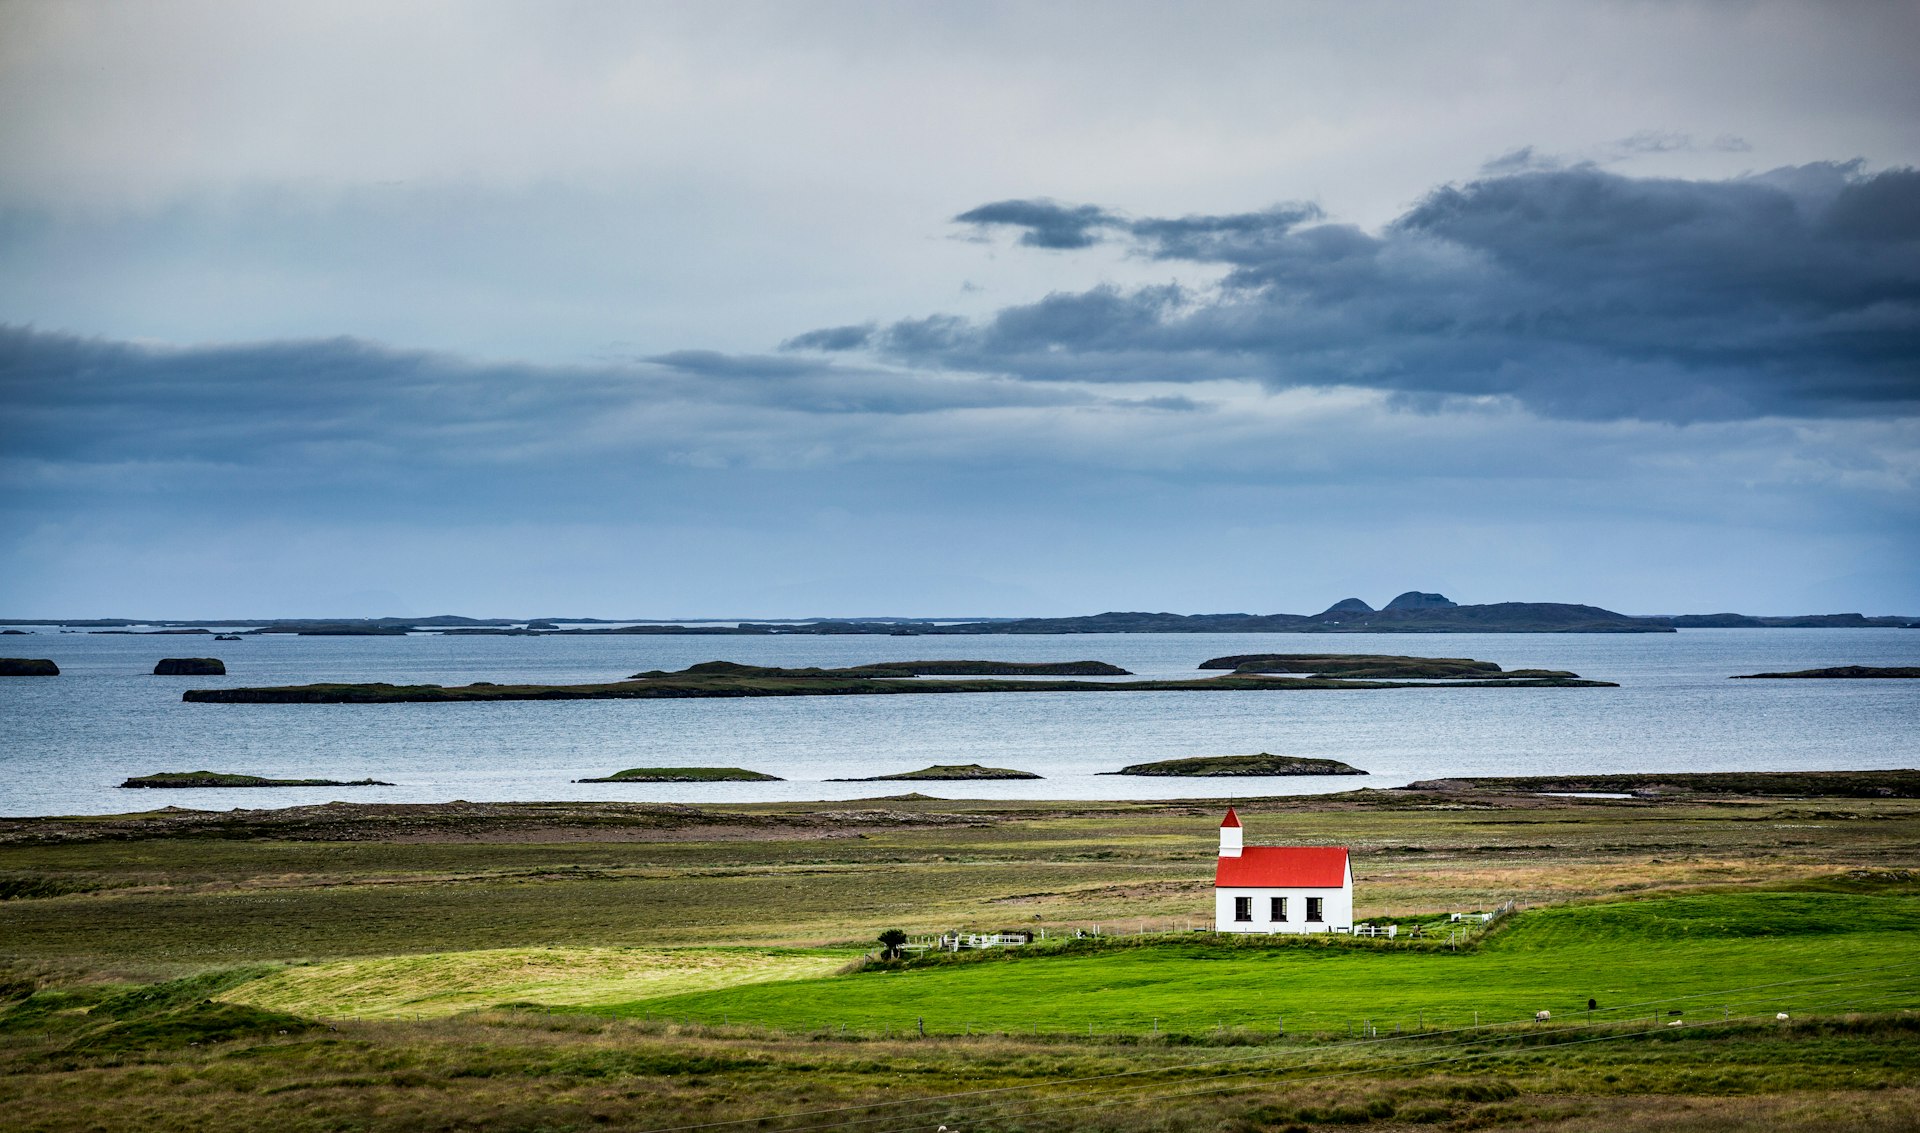 A house with a red roof in the middle of an otherwise empty green landscape with the sea in the background.